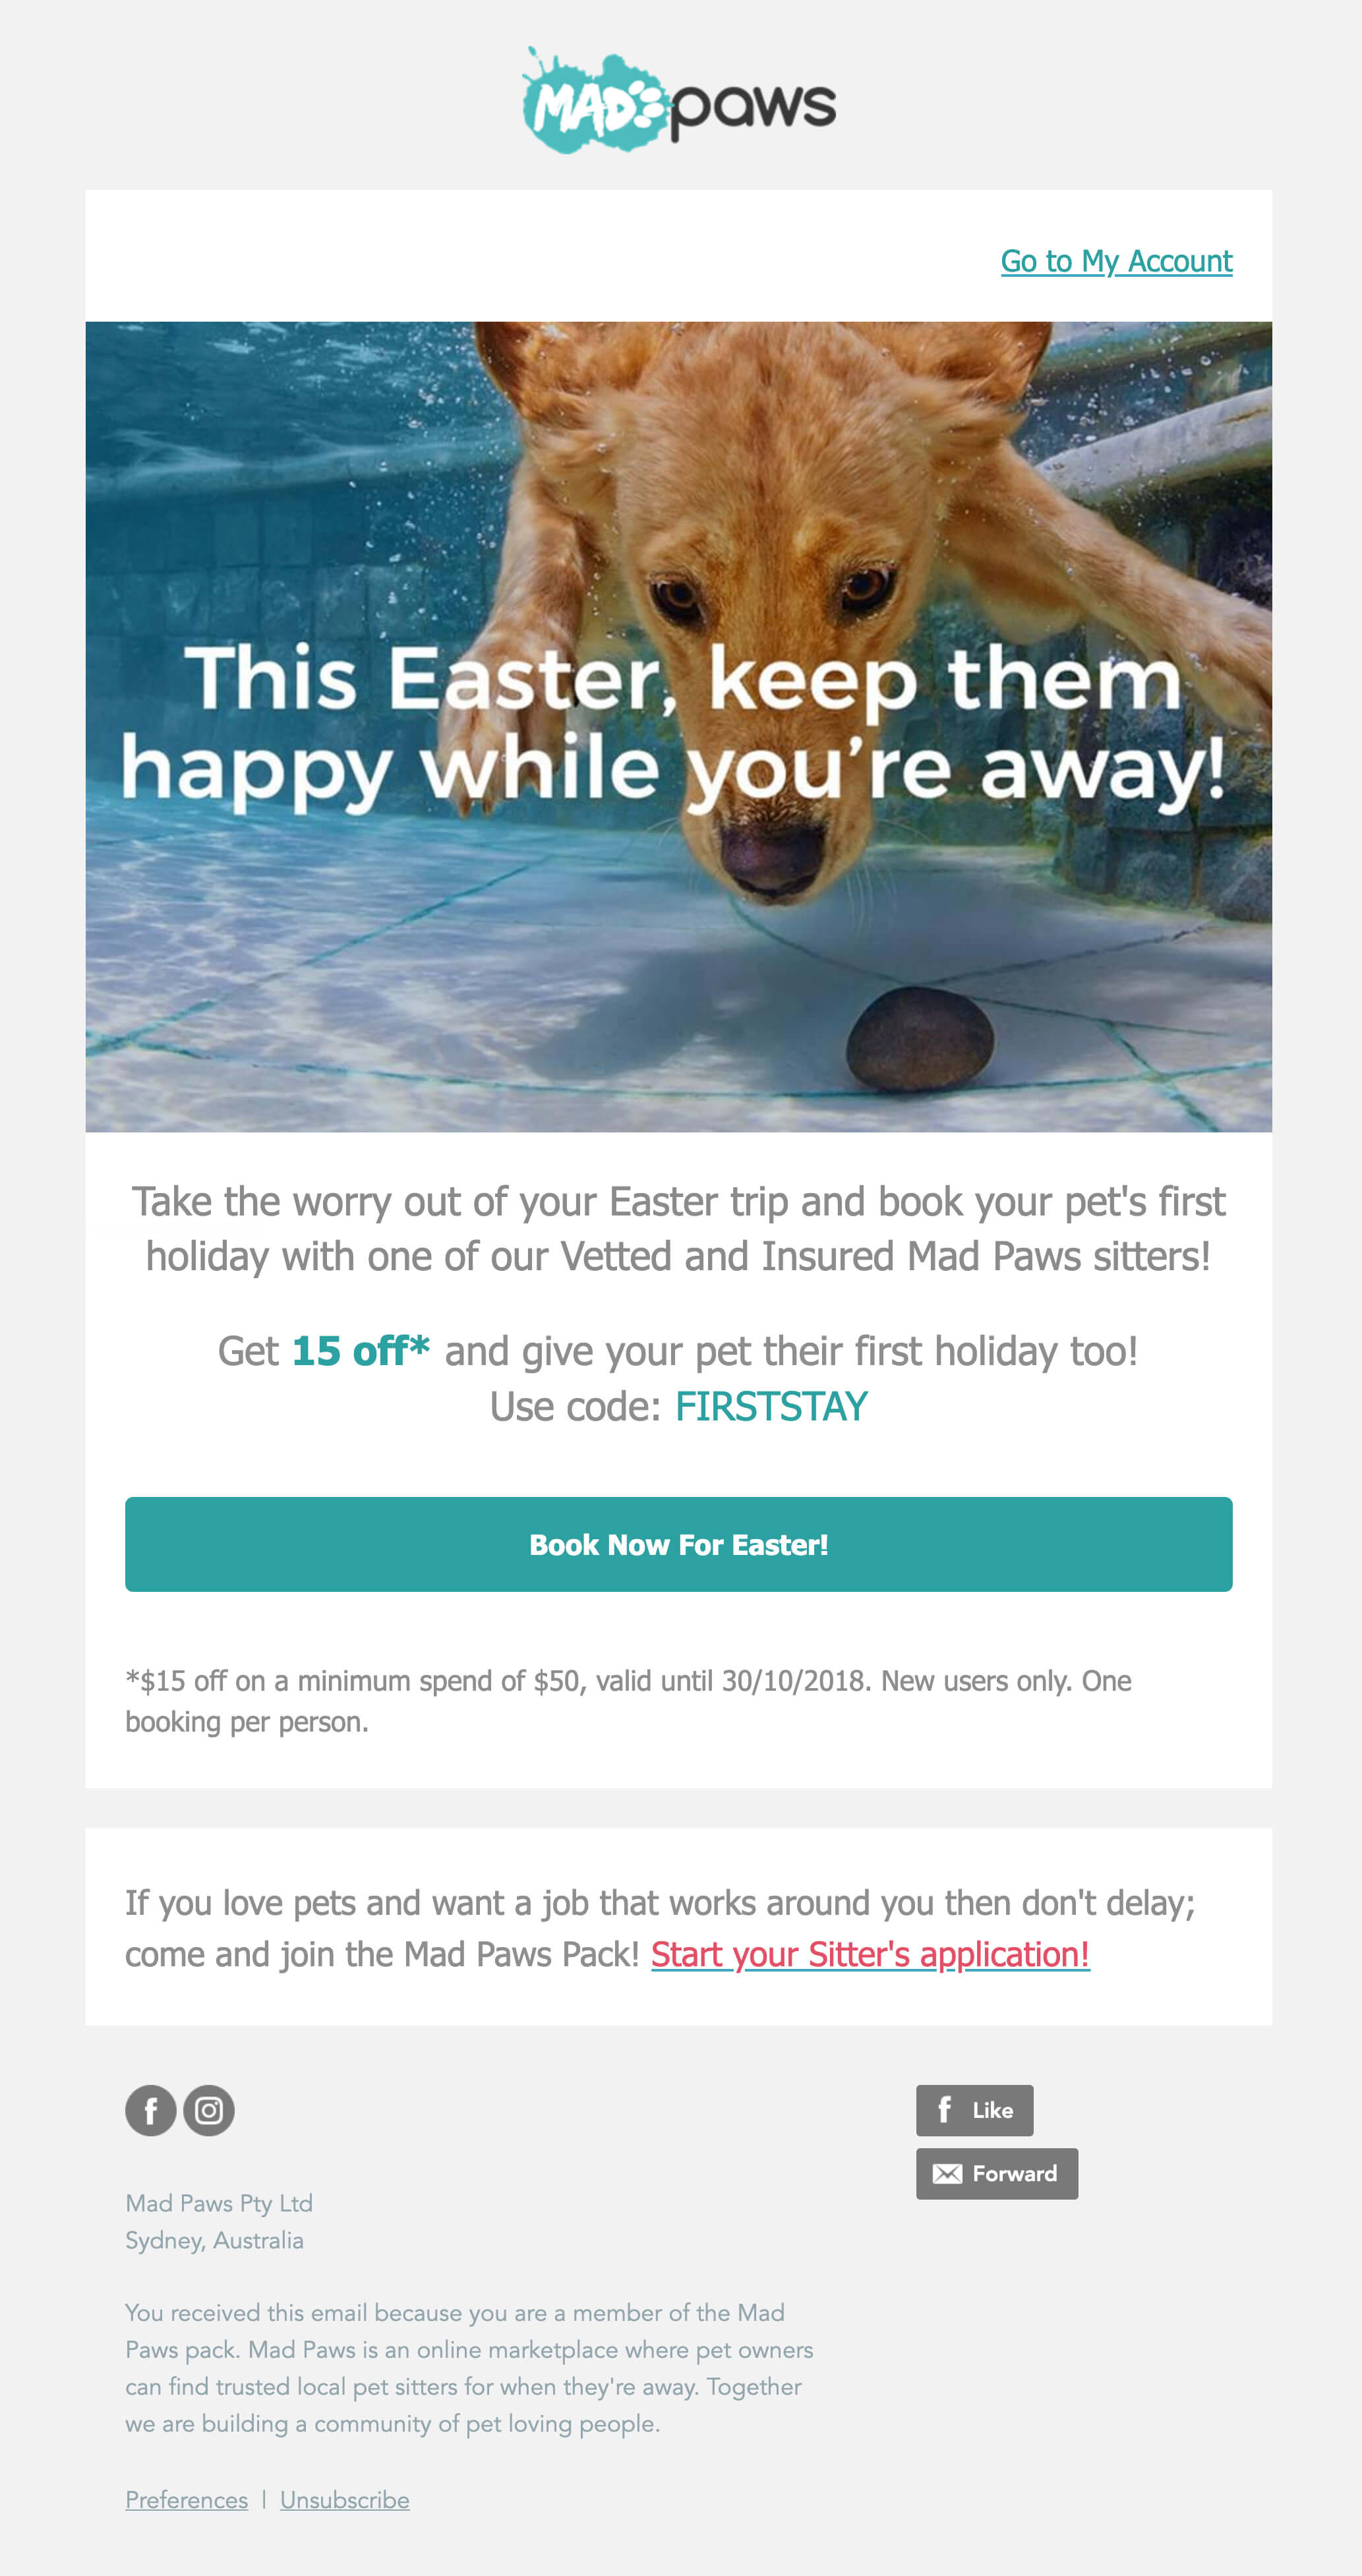 Holiday promotion email from Mad Paws with headline "This Easter, keep them happy while you're away!"